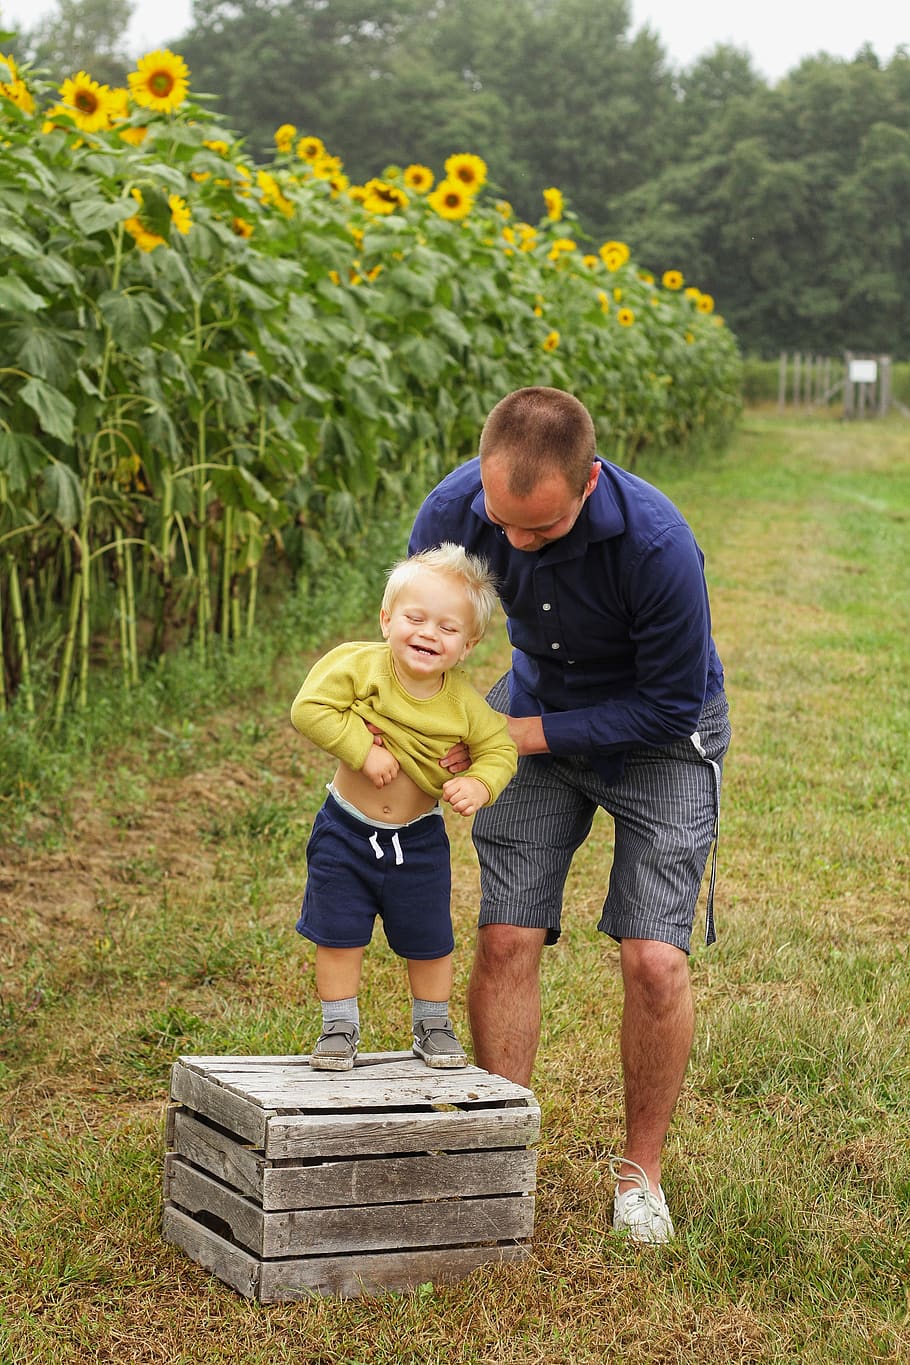 Man Holding Smiling Child Standing on Brown Wooden Crate Near Sunflowers, HD wallpaper